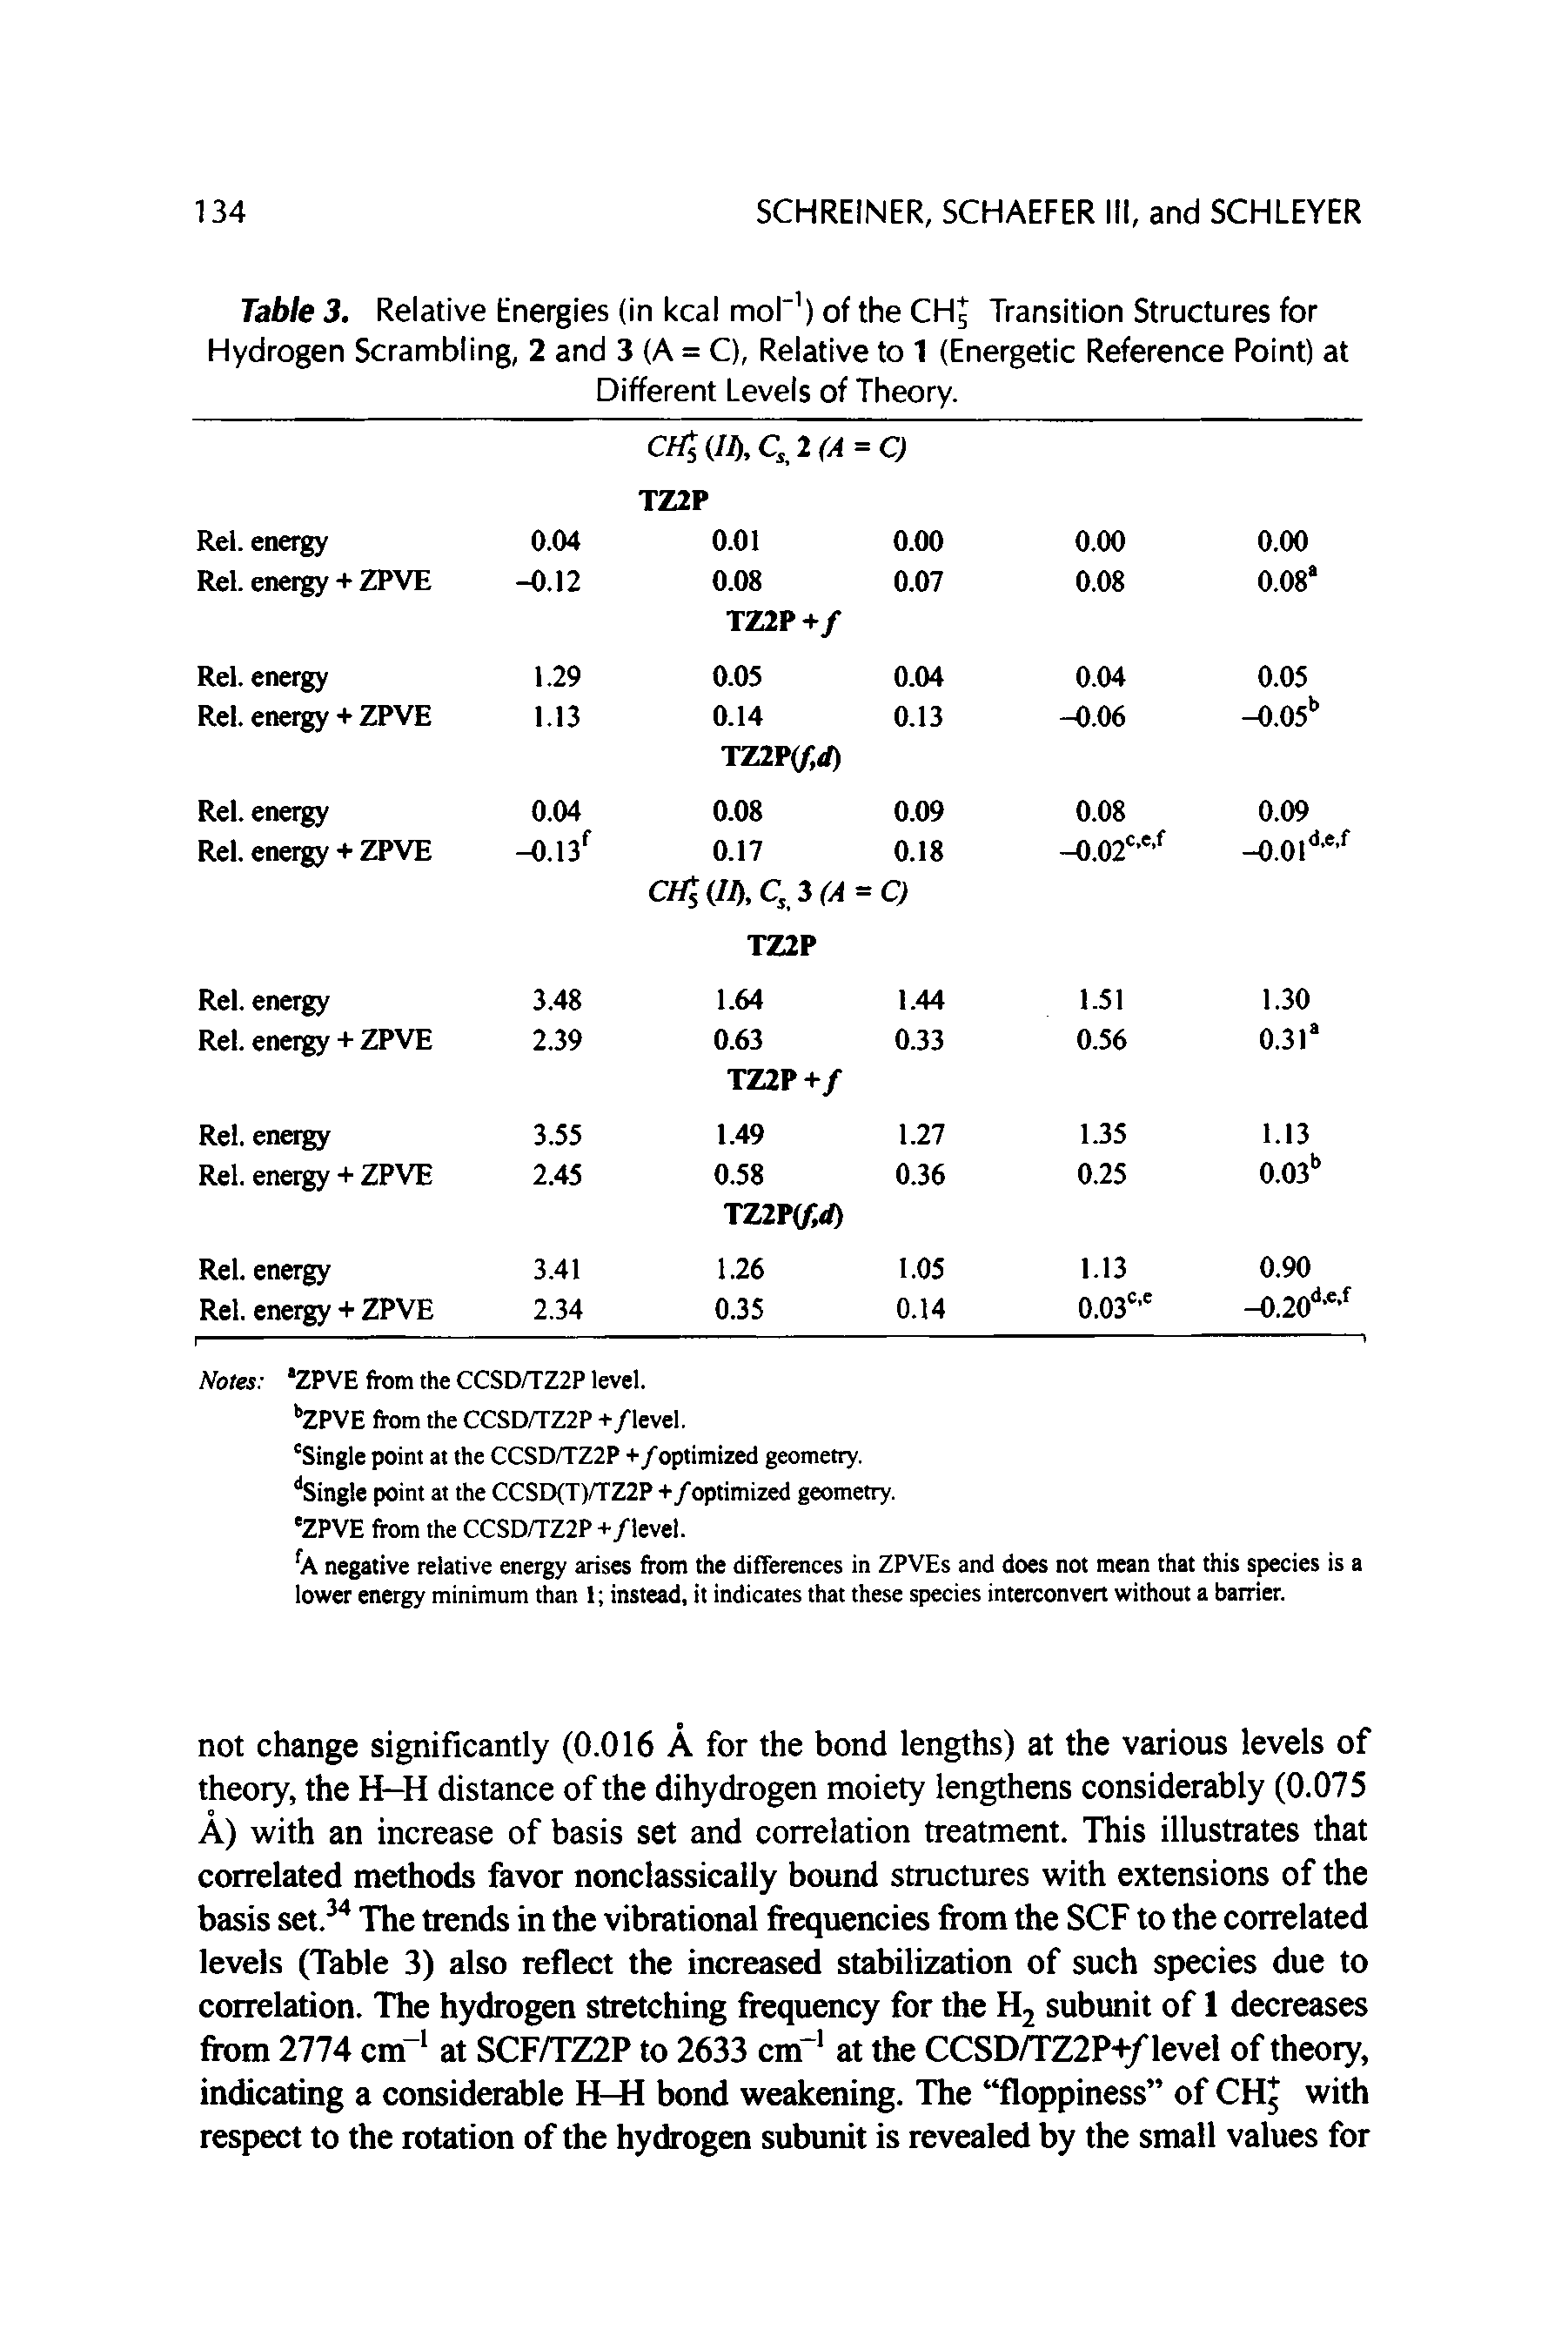 Table 3. Relative Energies (in kcal mol ) of the CHj Transition Structures for Hydrogen Scrambling, 2 and 3 (A = C), Relative to 1 (Energetic Reference Point) at Different Levels of Theory.